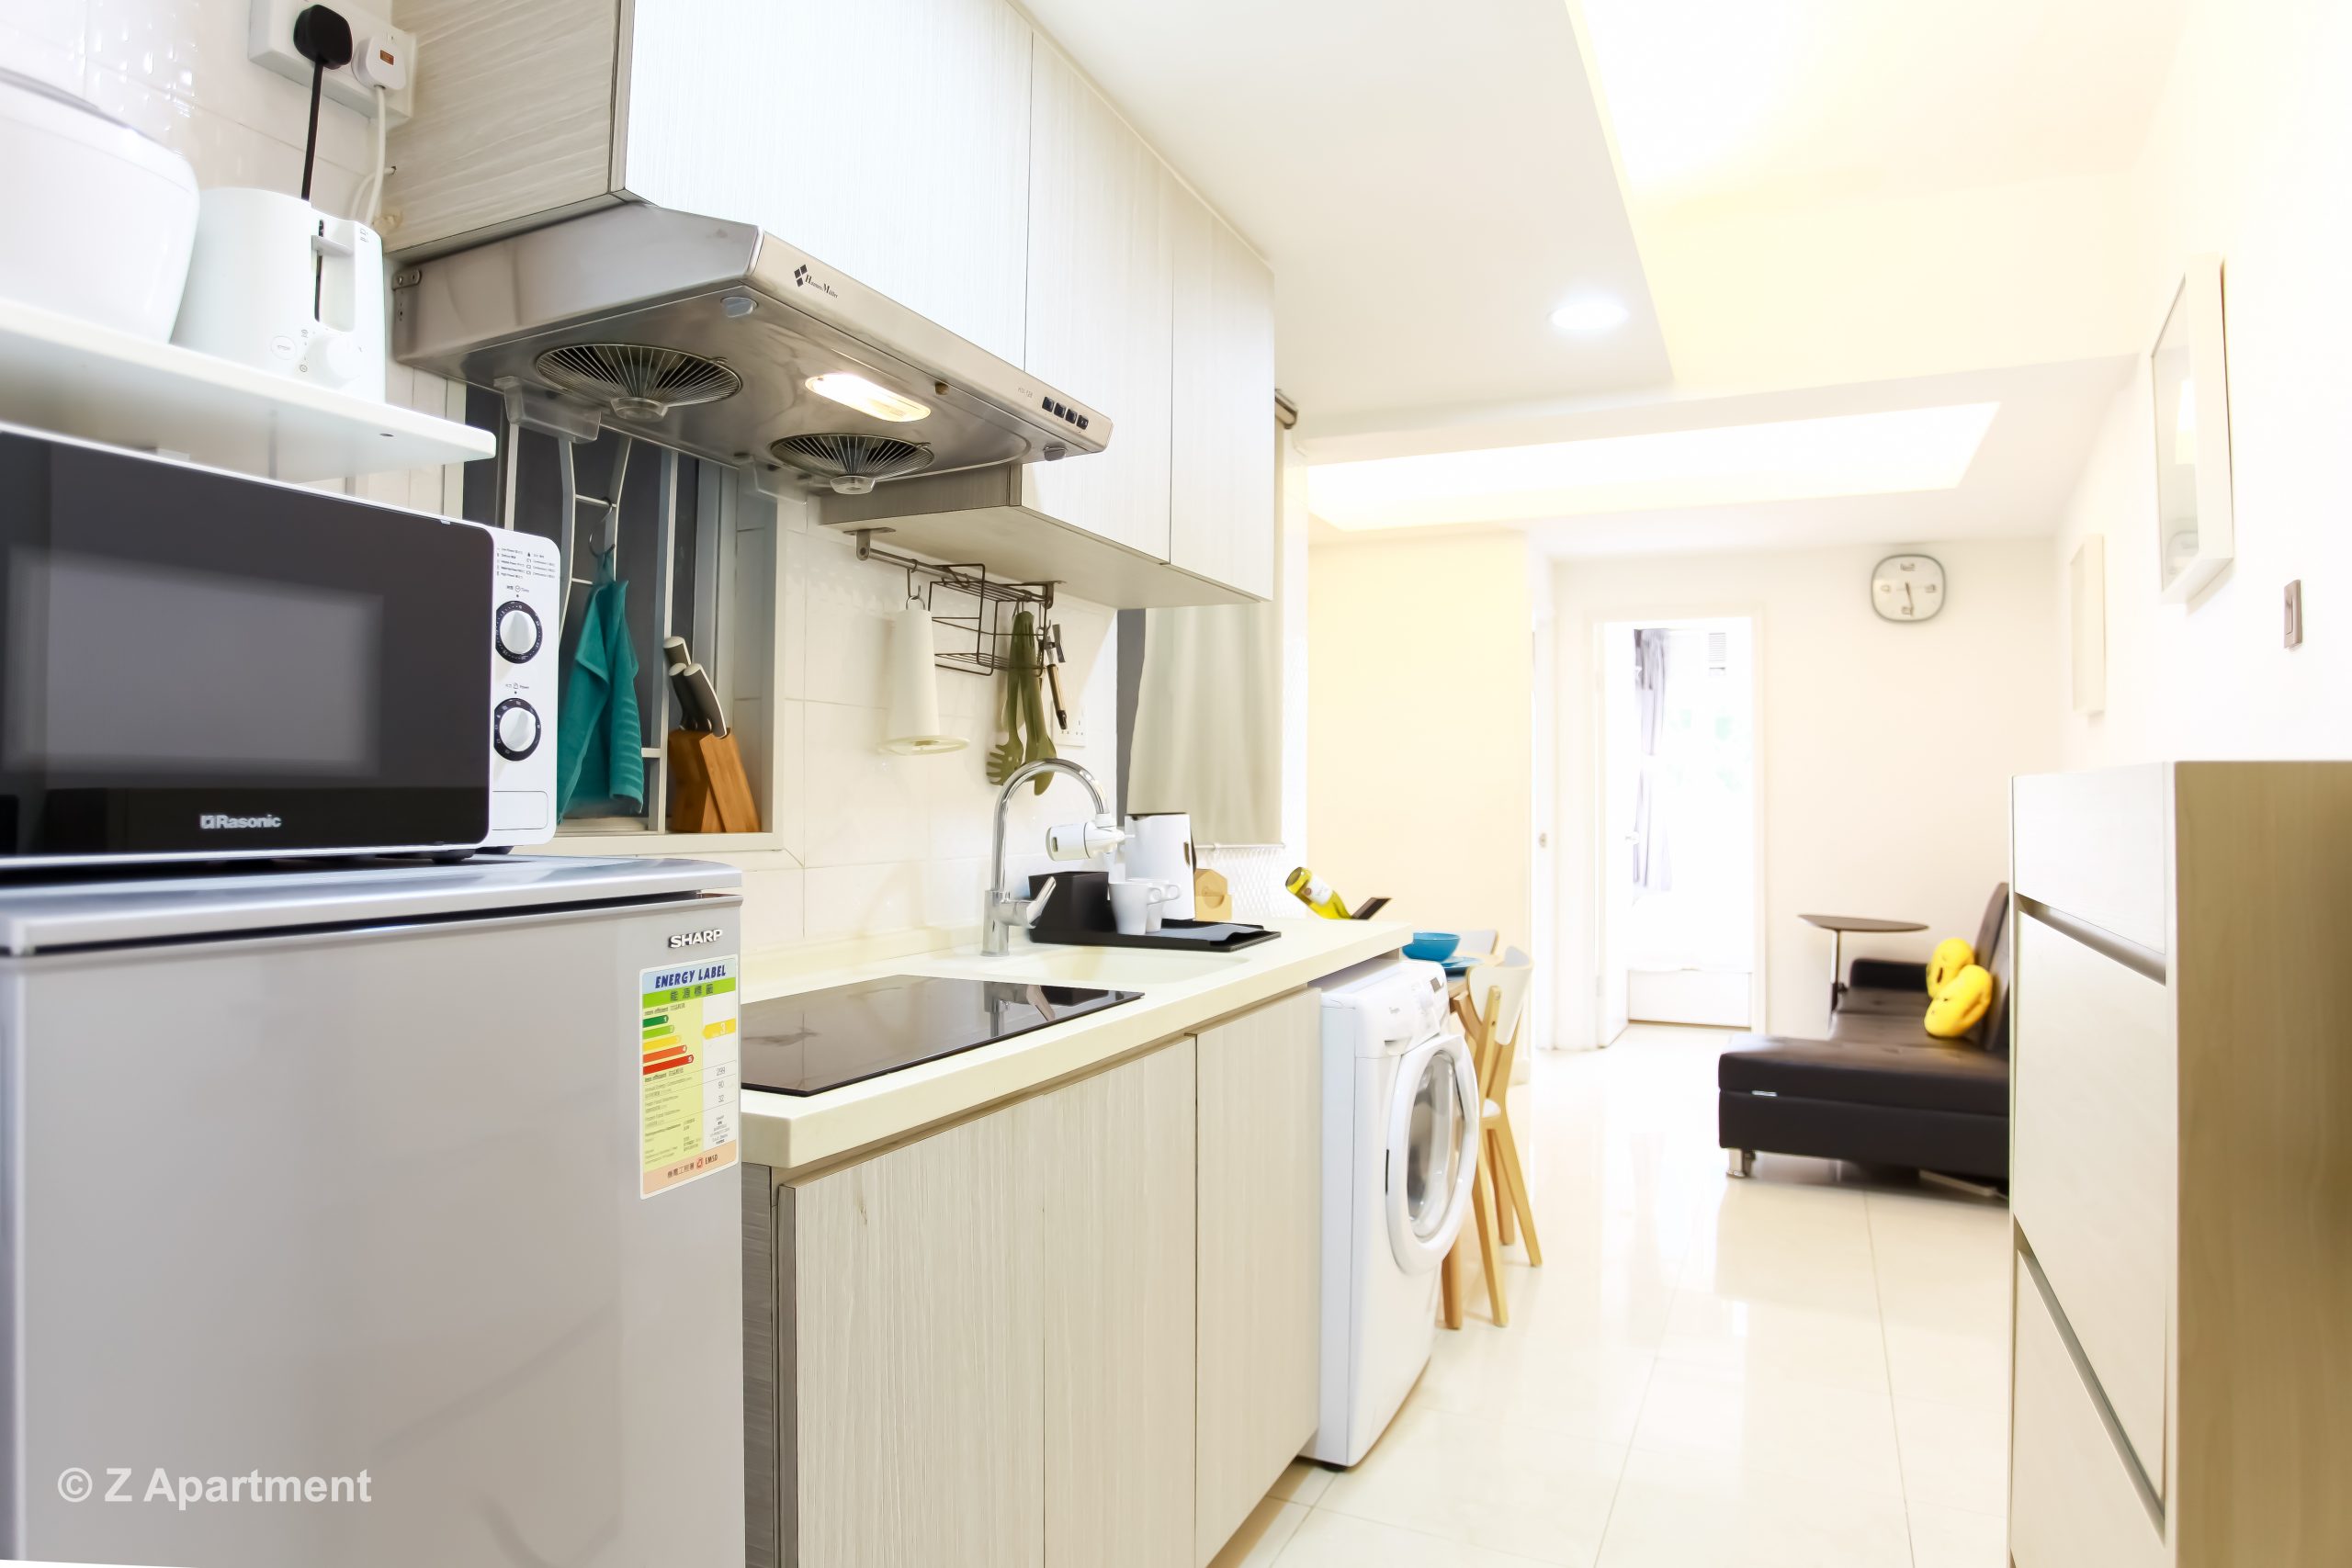 Modern kitchen with induction stove in 2 bedrooms Hong Kong serviced apartment quarry bay